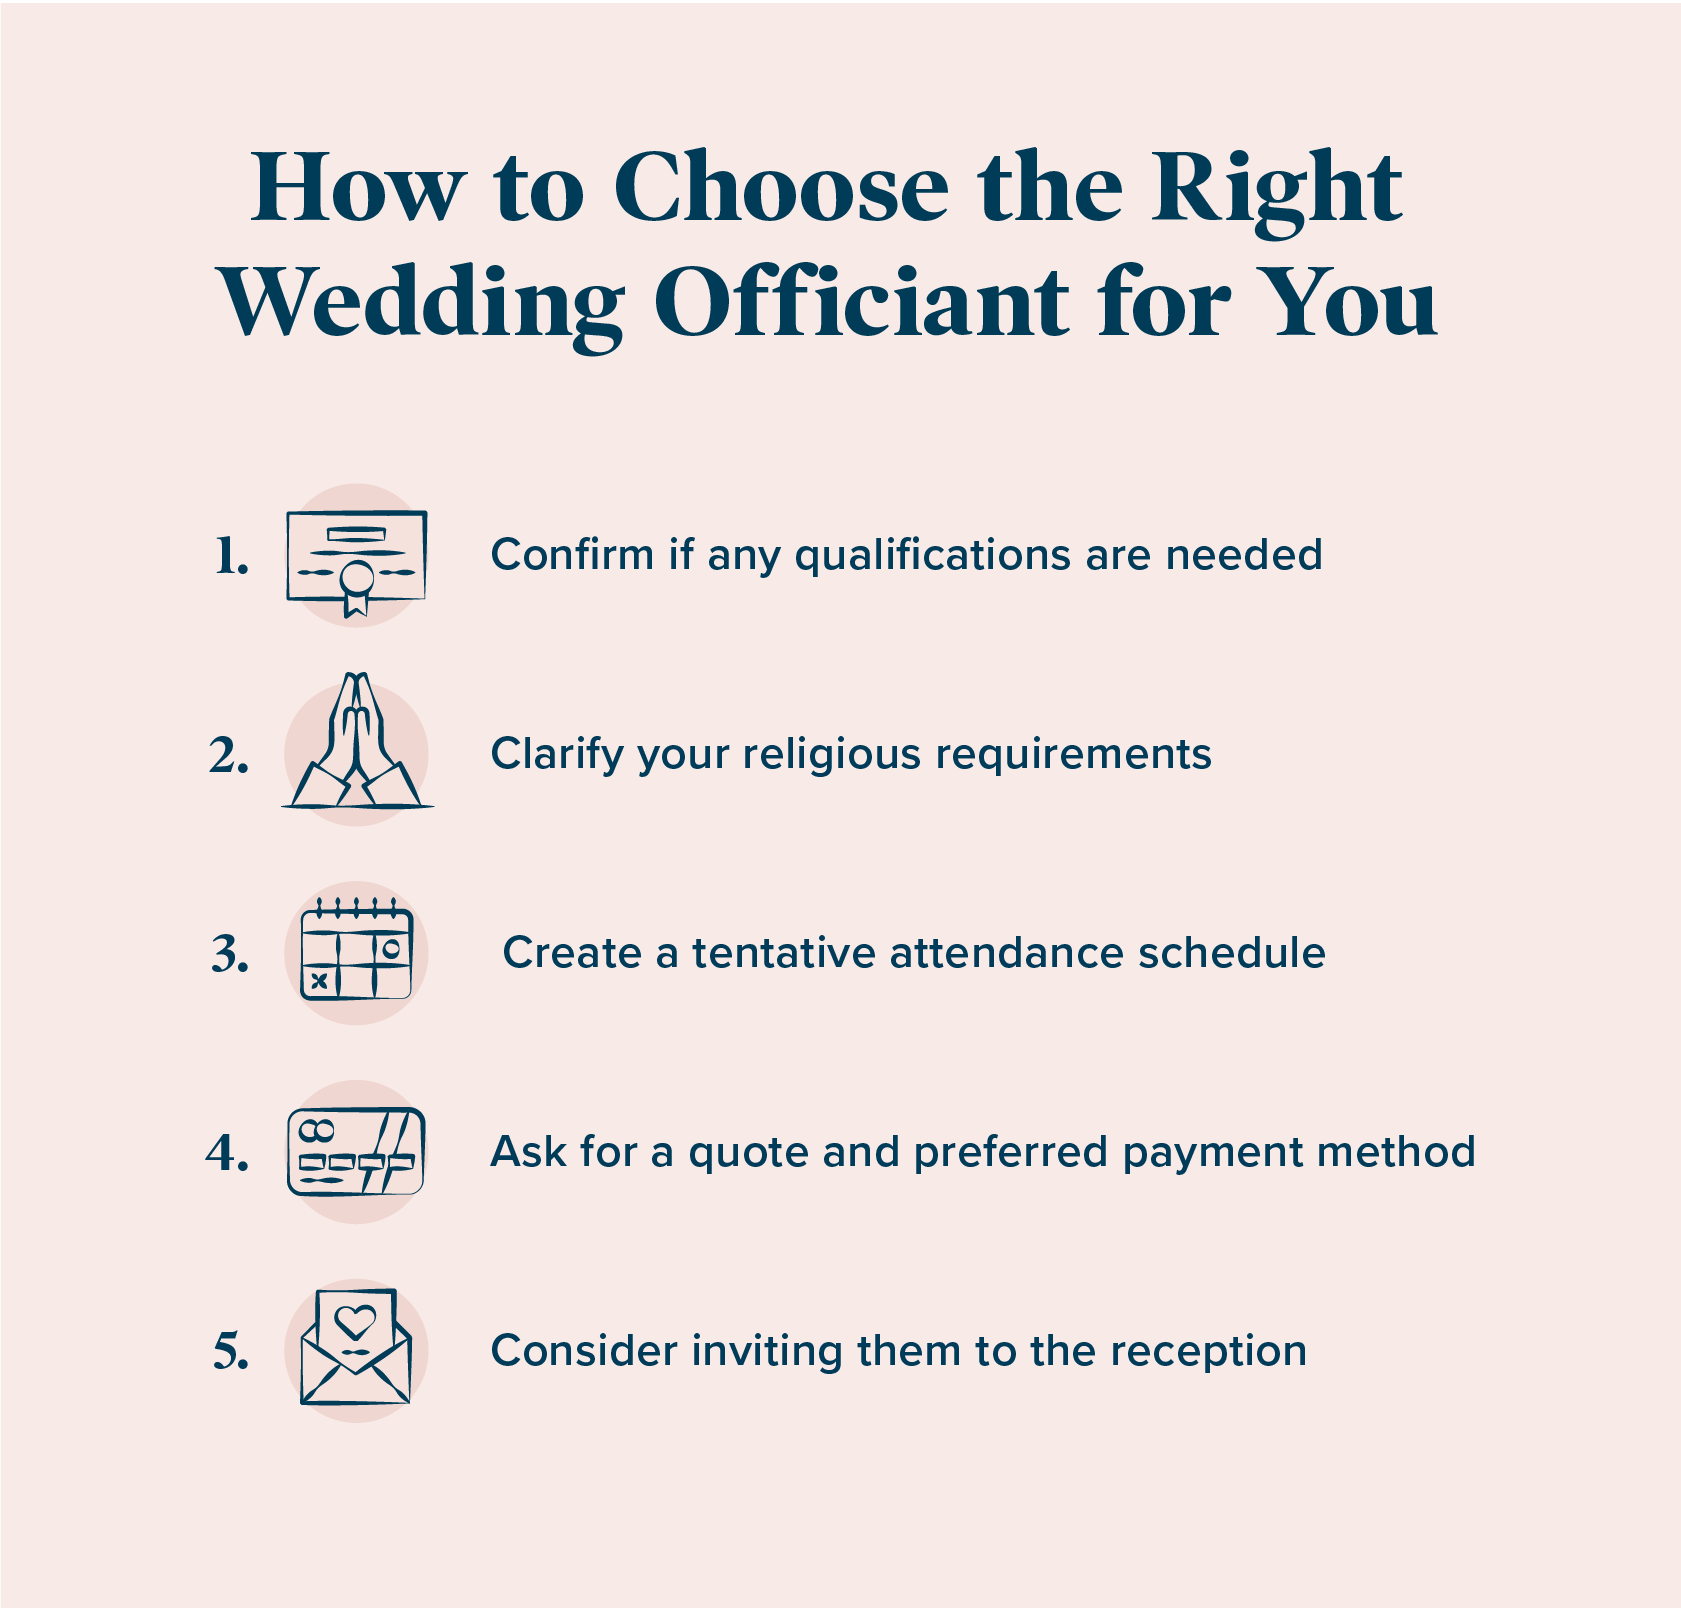 Wedding Officiant Cost by Type, According to Real Couples